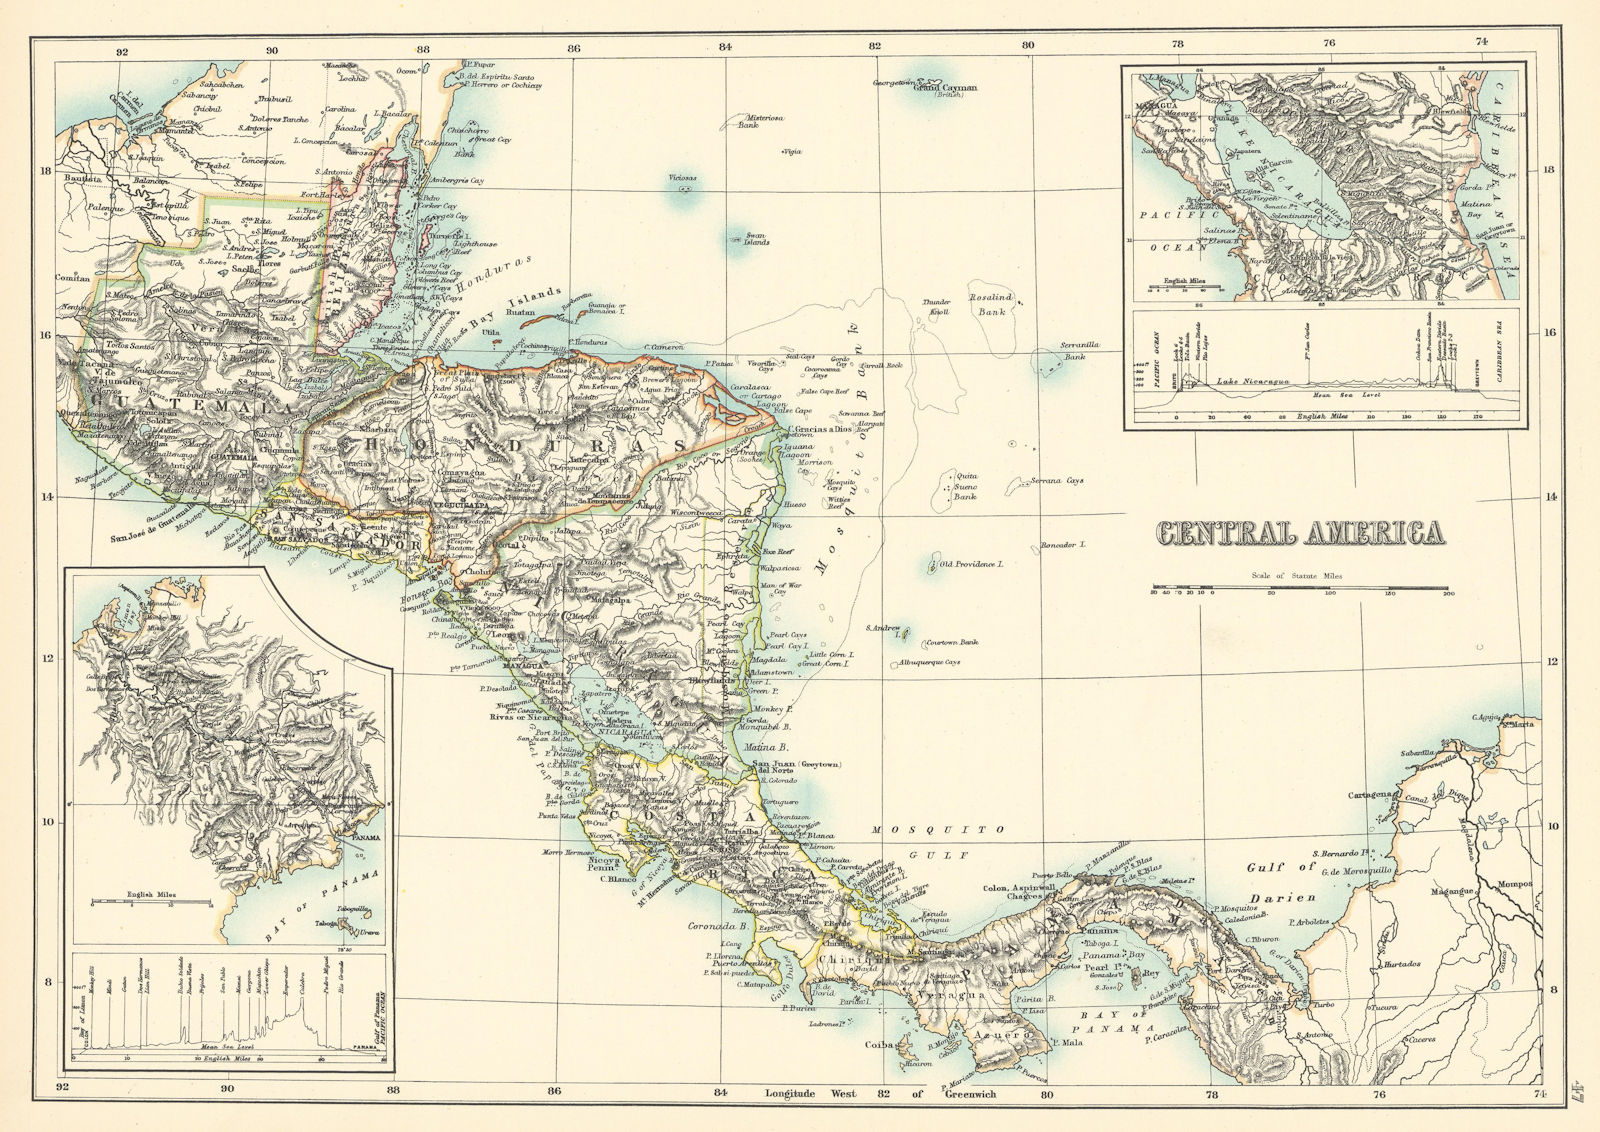 Central America. Panama Canal 16 yrs before completion. BARTHOLOMEW 1898 map